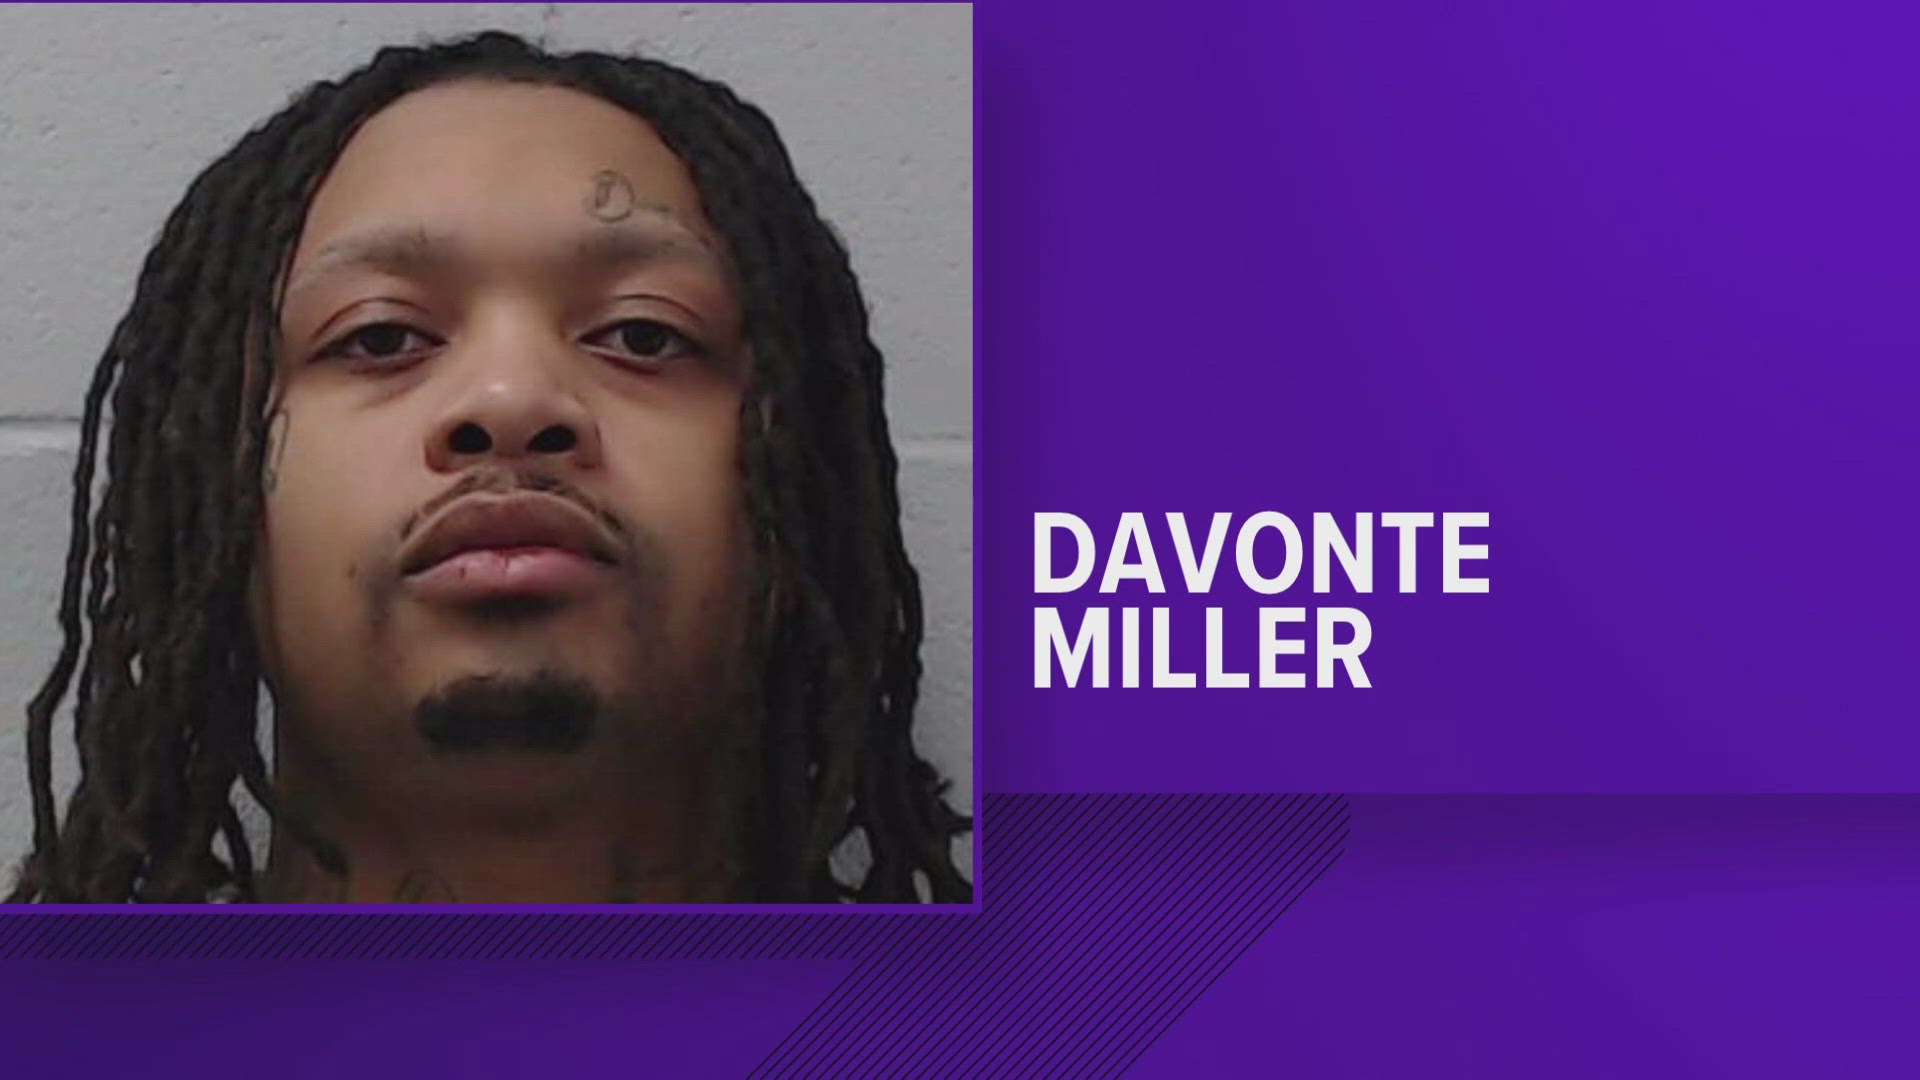 A man has been sentenced to 55 years in prison for killing a Kyle teenager in 2019.